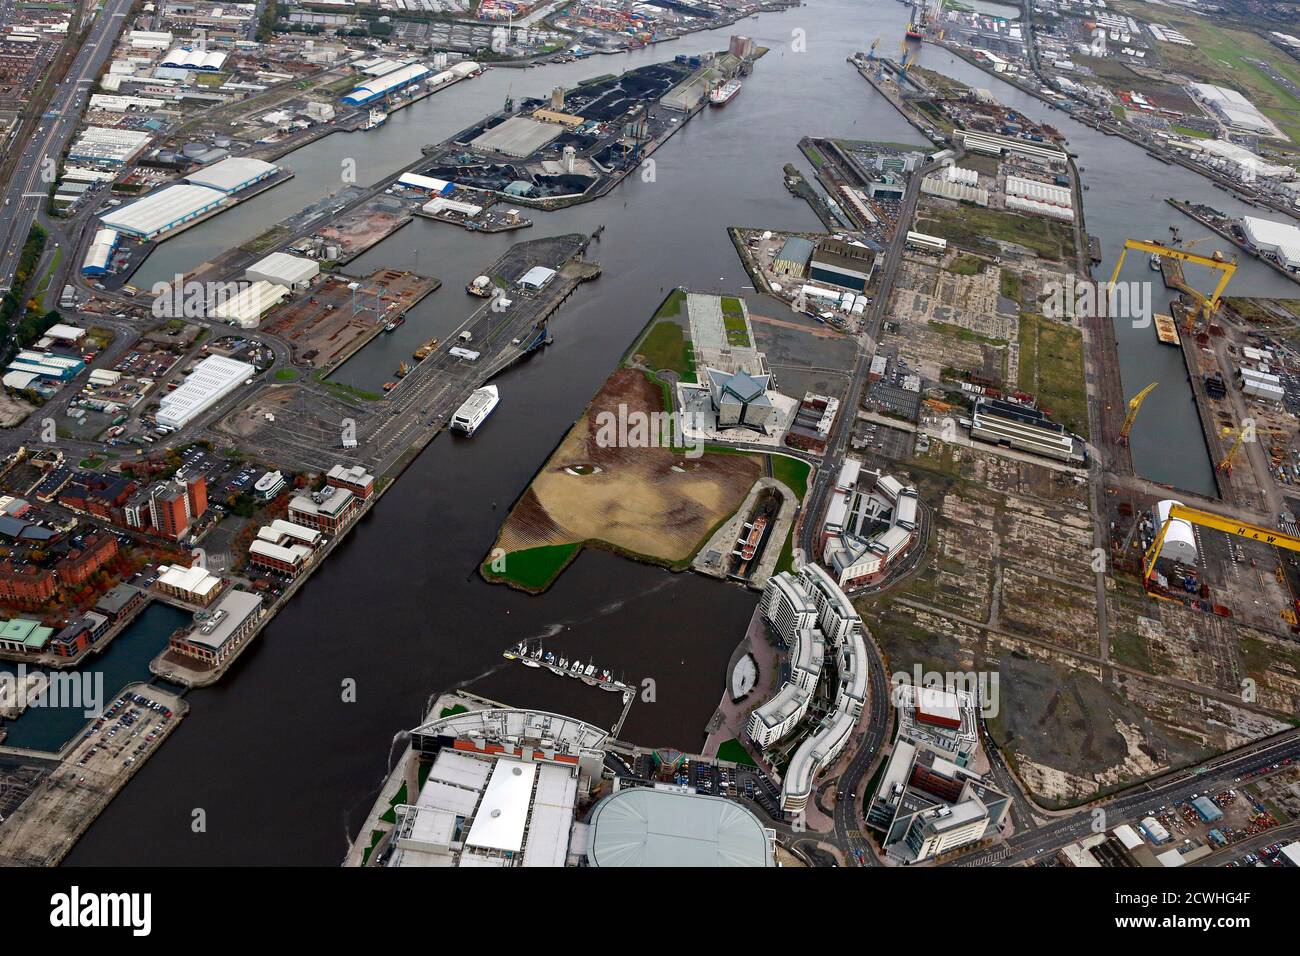 A piece of land art entitled 'Wish' showing the face of an anonymous six-year-old local Belfast girl is seen in this aerial view of the Titanic quarter in Belfast October 23, 2013. The artwork by Cuban-American artist Jorge Rodriguez-Gerada spans 11 acres, is made up from 2,000 tonnes of sand, 2,000 tonnes of soil and some 30,000 wooden pegs. It will remain on view until December 2013.  REUTERS/Cathal McNaughton (NORTHERN IRELAND - Tags: ENTERTAINMENT SOCIETY ENVIRONMENT) Stock Photo